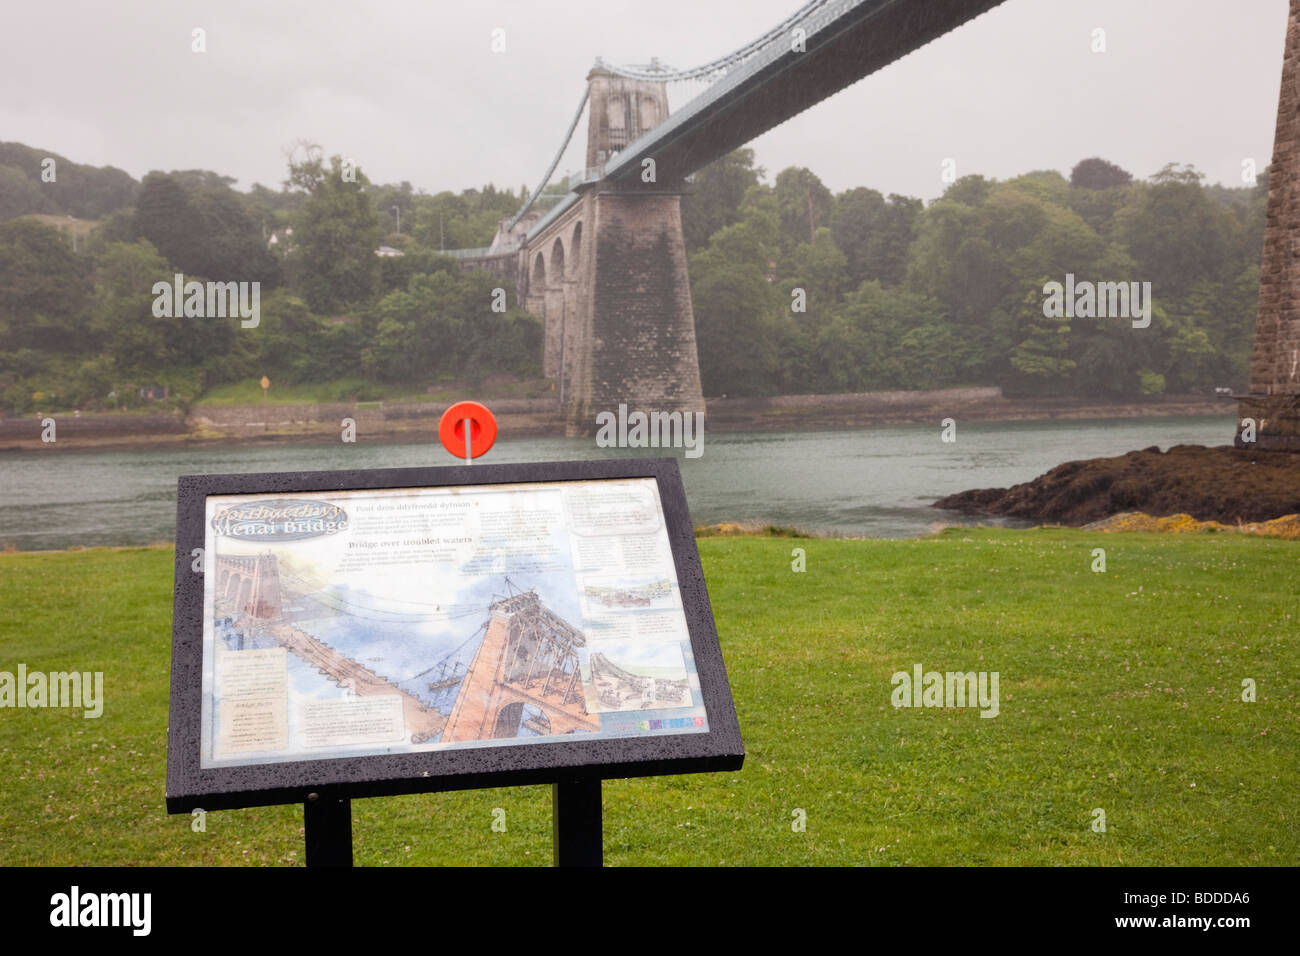 Porthaethwy, Anglesey, North Wales, UK. Menai suspension bridge and information sign by the Menai Strait in pouring rain Stock Photo